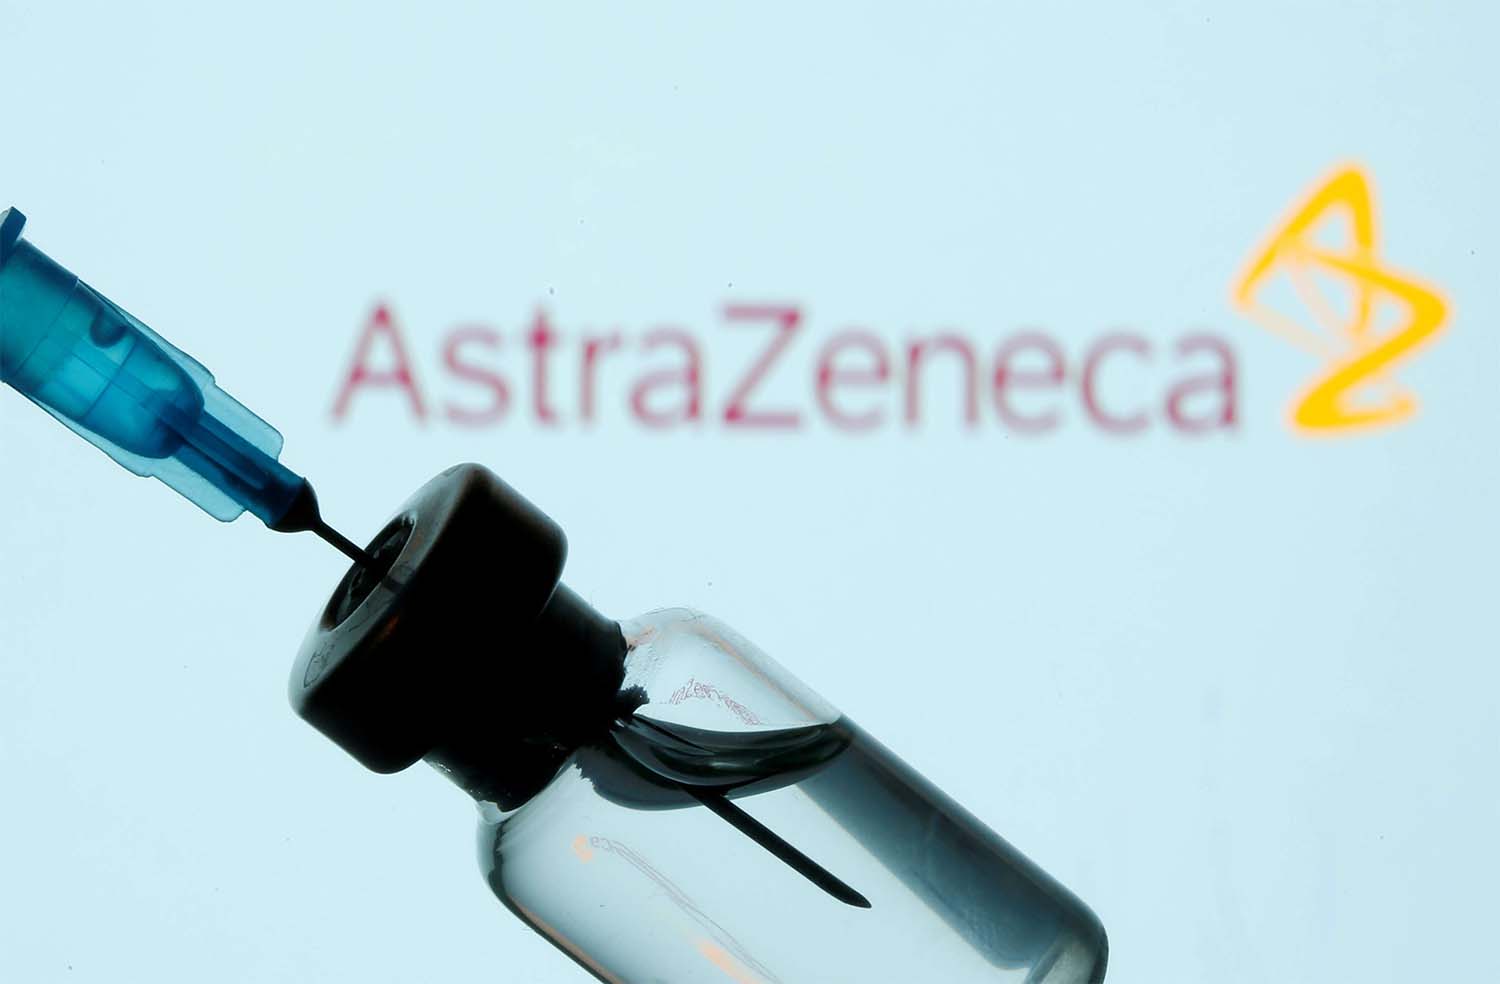 Morocco has placed orders for 65 million doses, comprising 25 million of the AstraZeneca vaccine